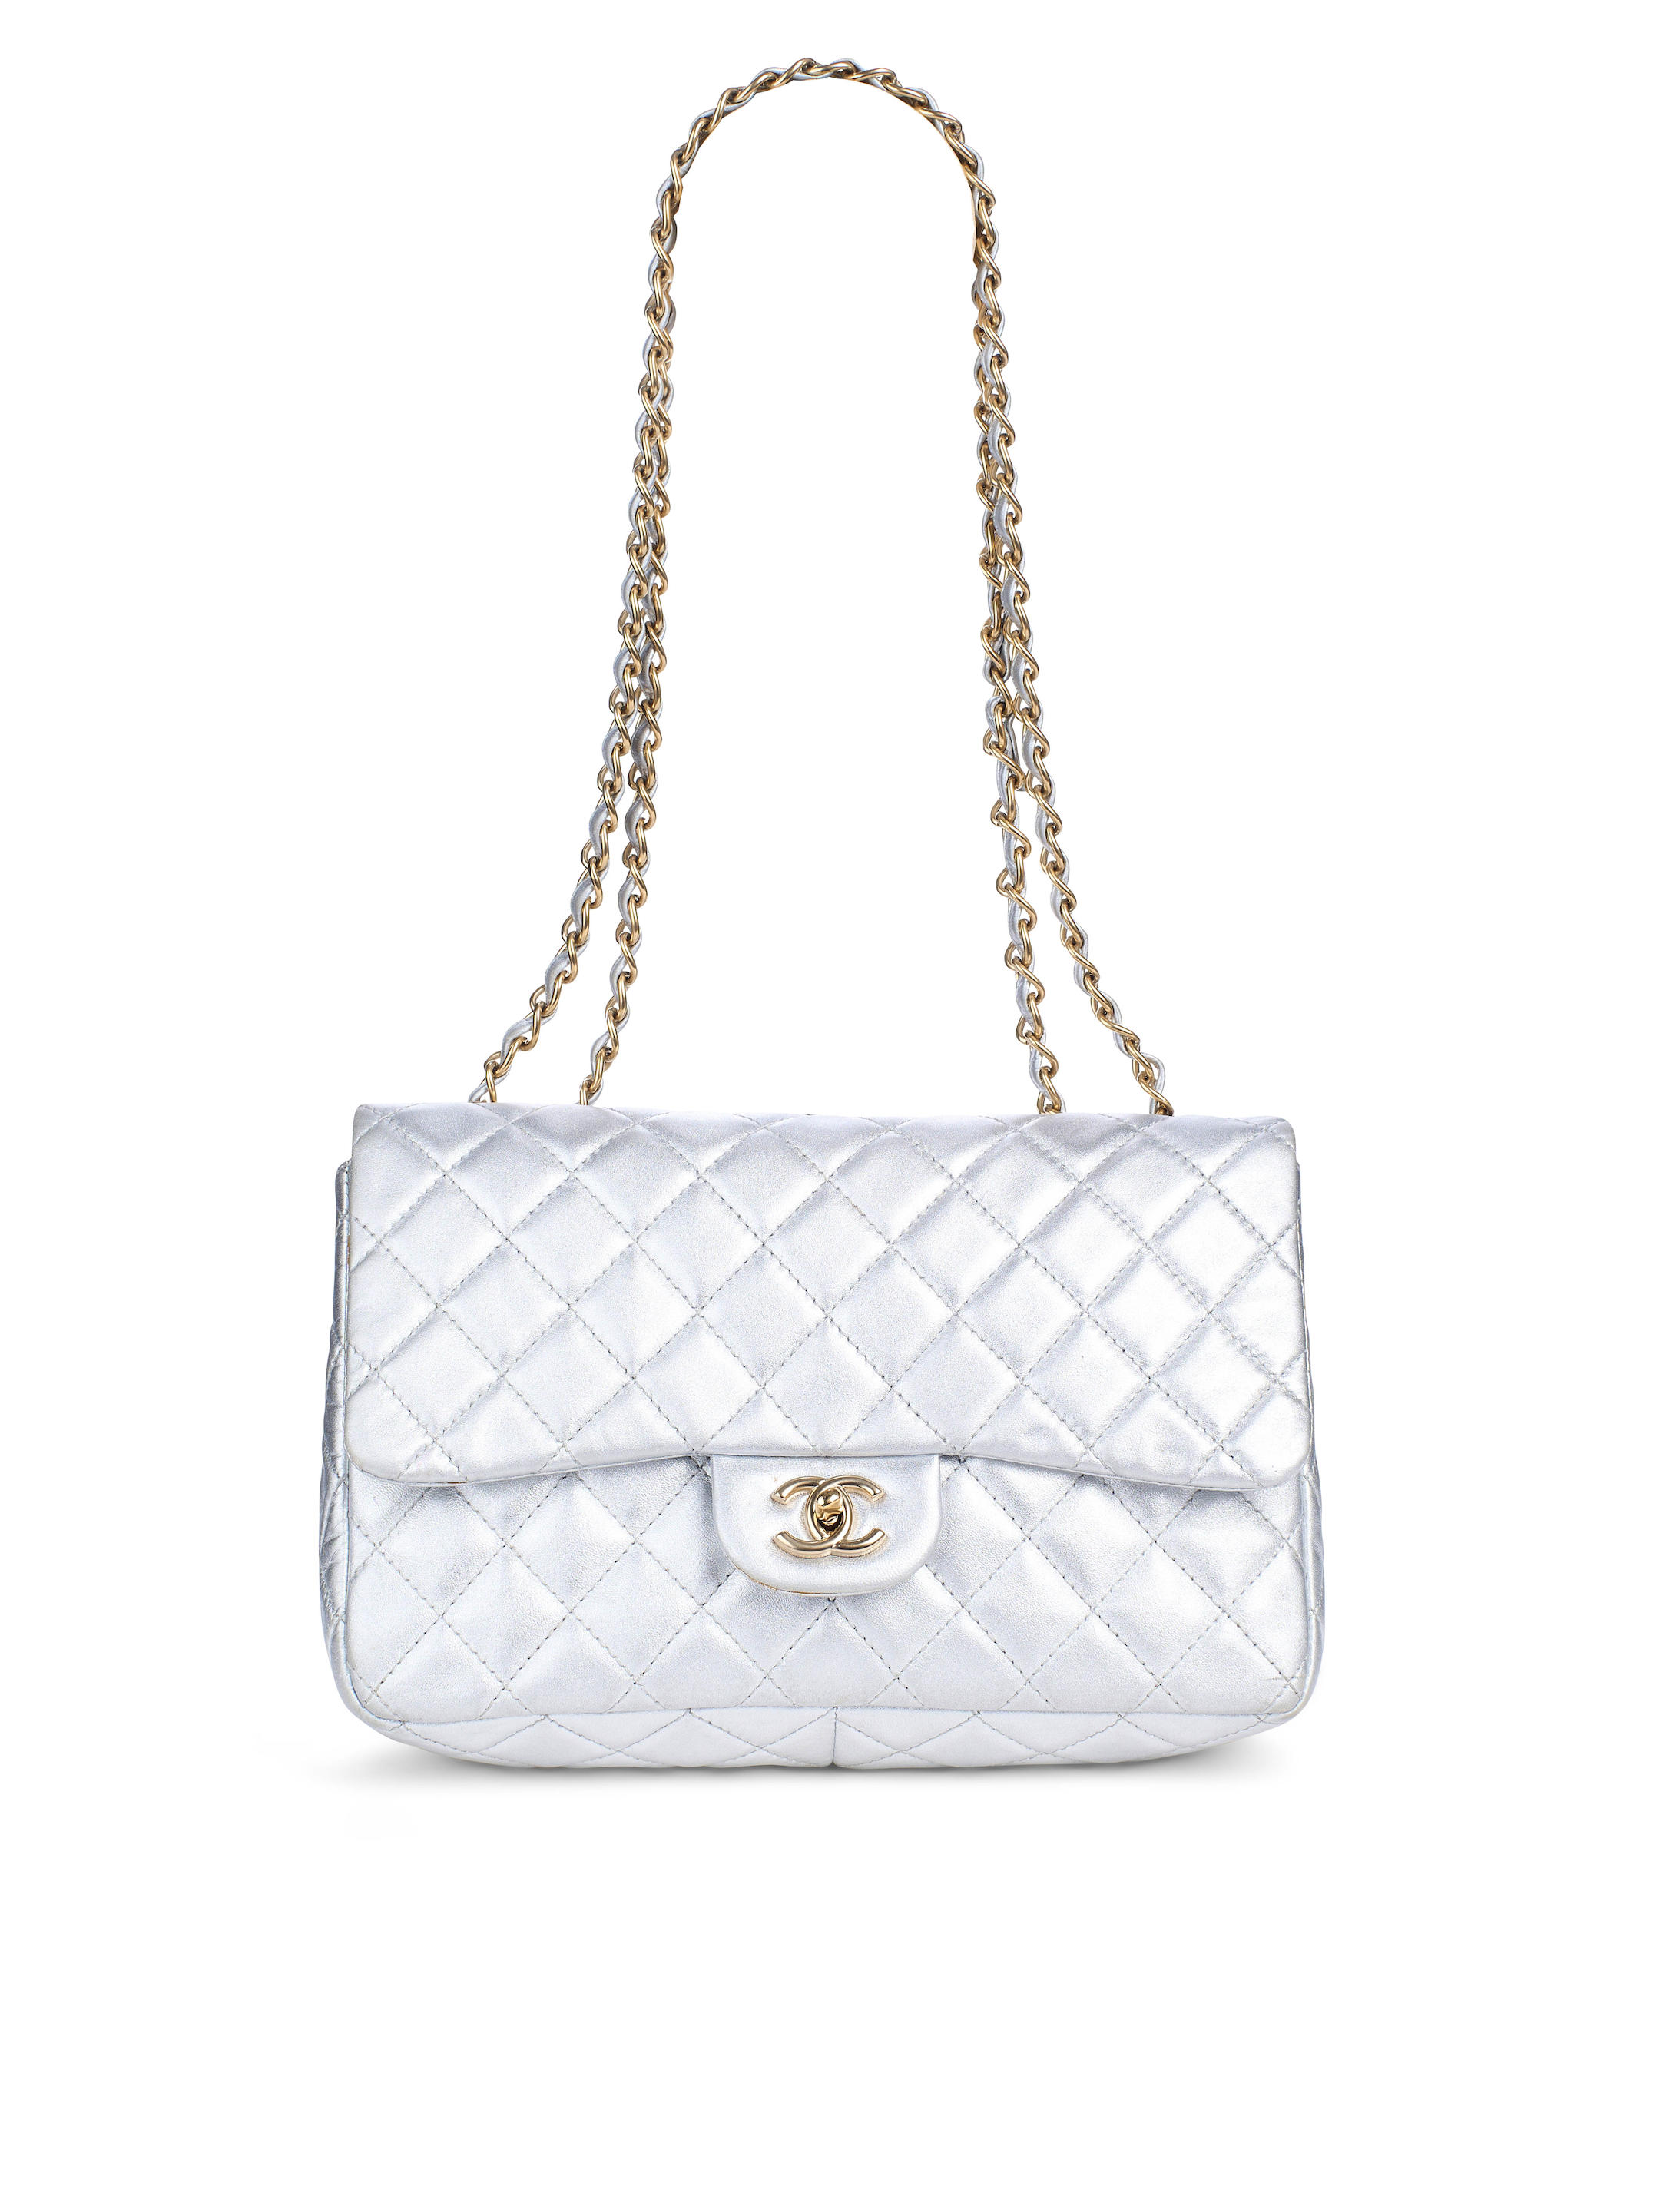 Buy Exclusive Metallic Silver Chanel Classic Flap at REDELUXE - Luxurious  Pre-Owned Handbags on Sale! – RD